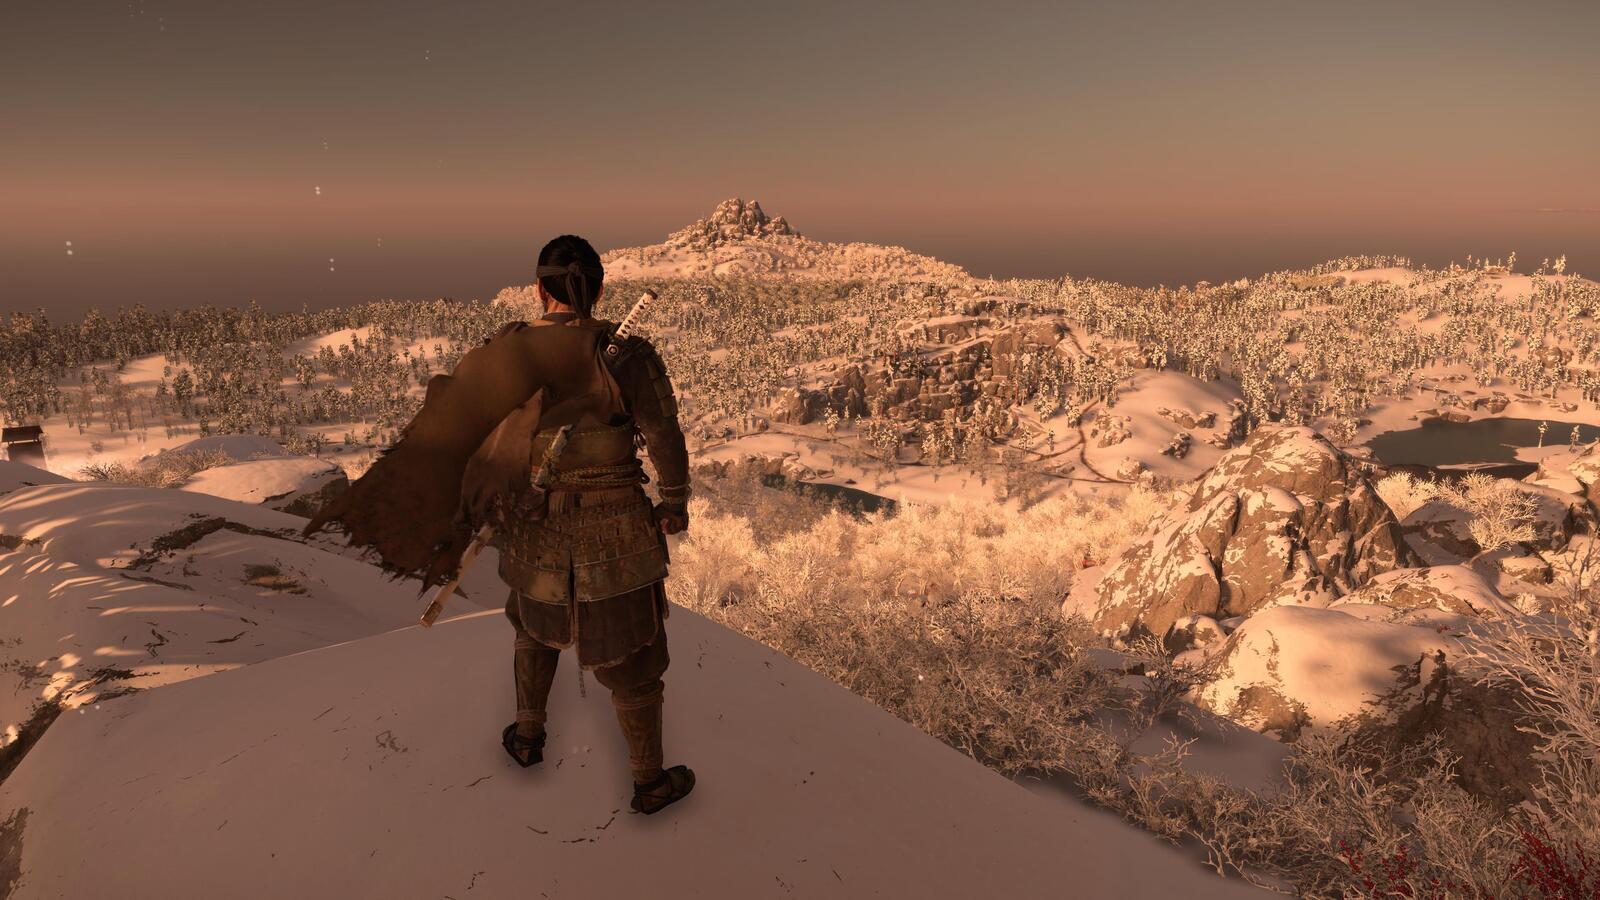 Samurai on a hill overlooking a winter landscape with another hill in the distance